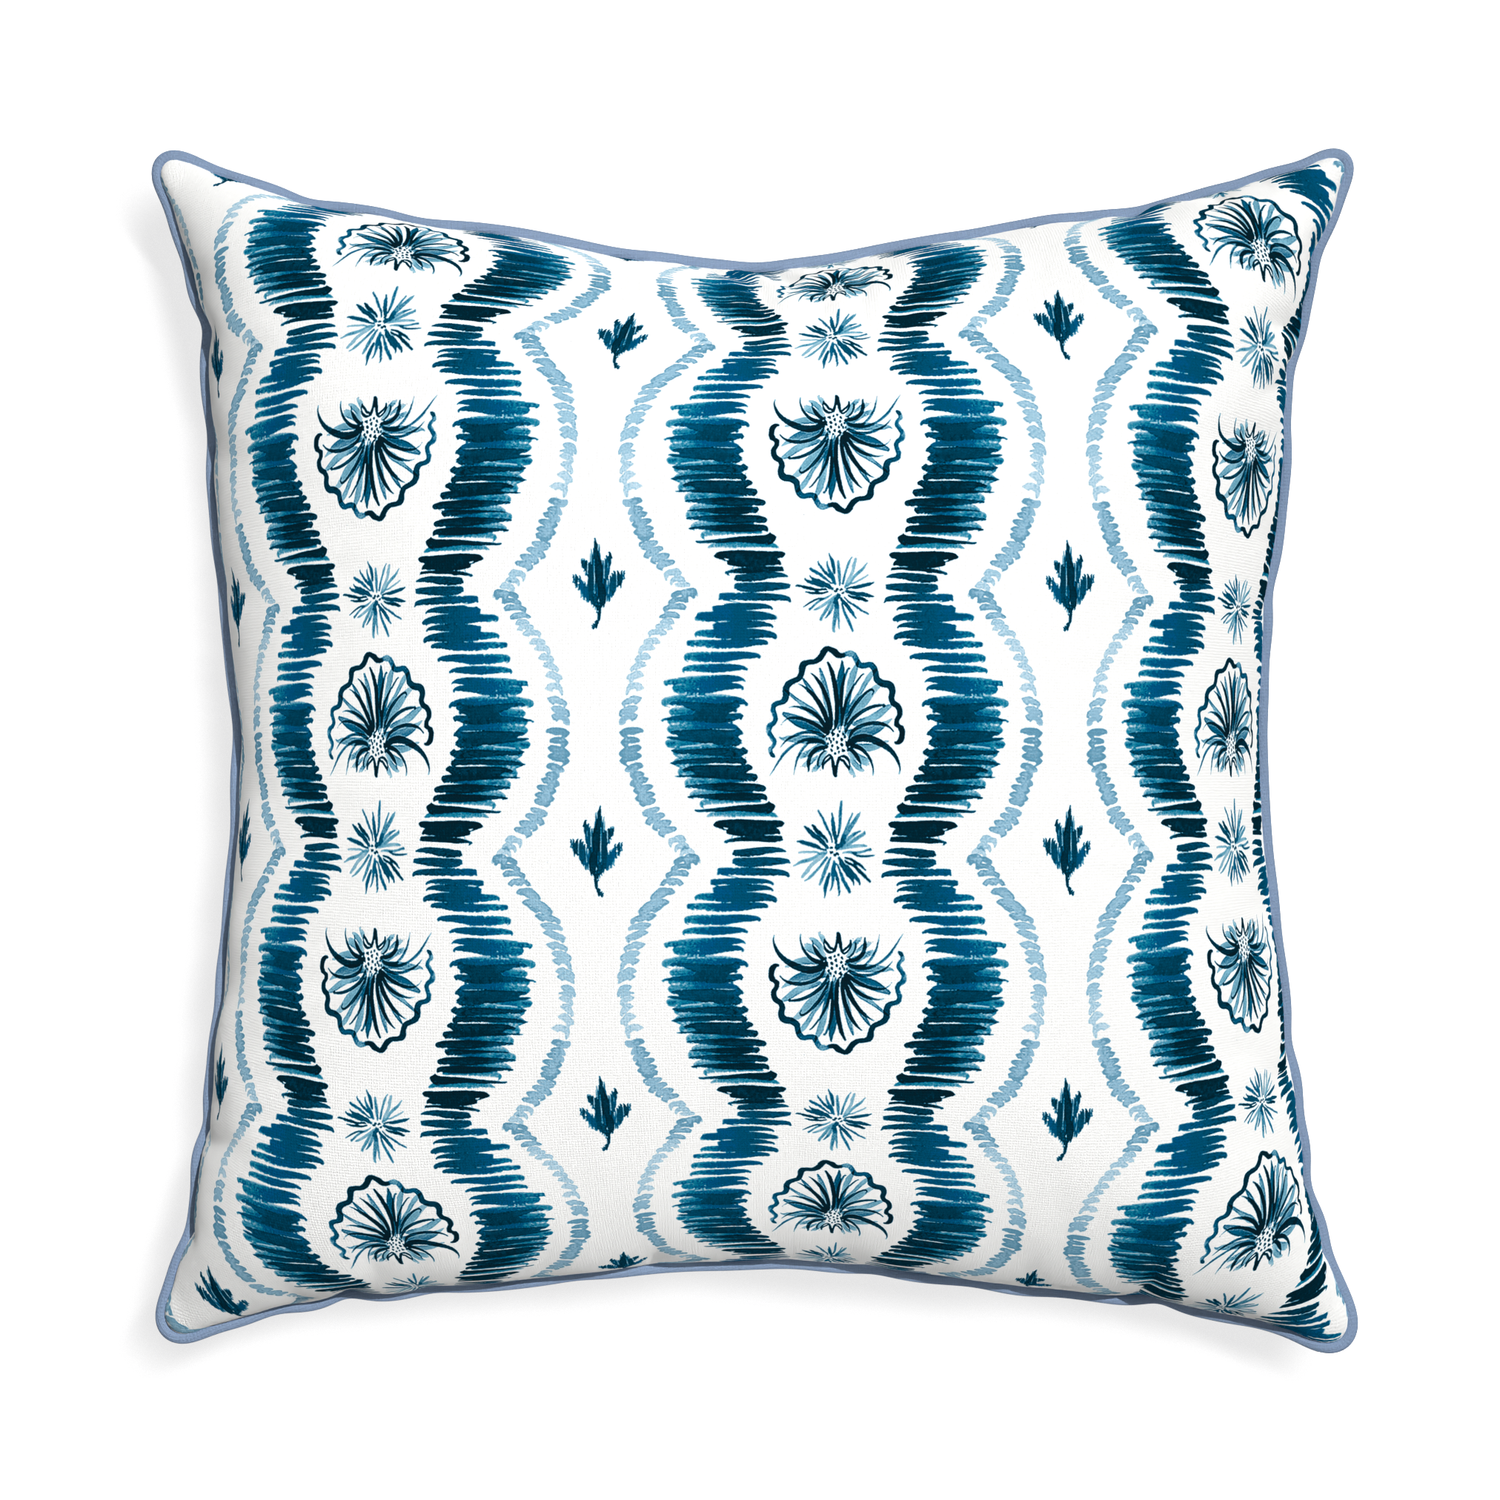 Euro-sham alice custom blue ikatpillow with sky piping on white background